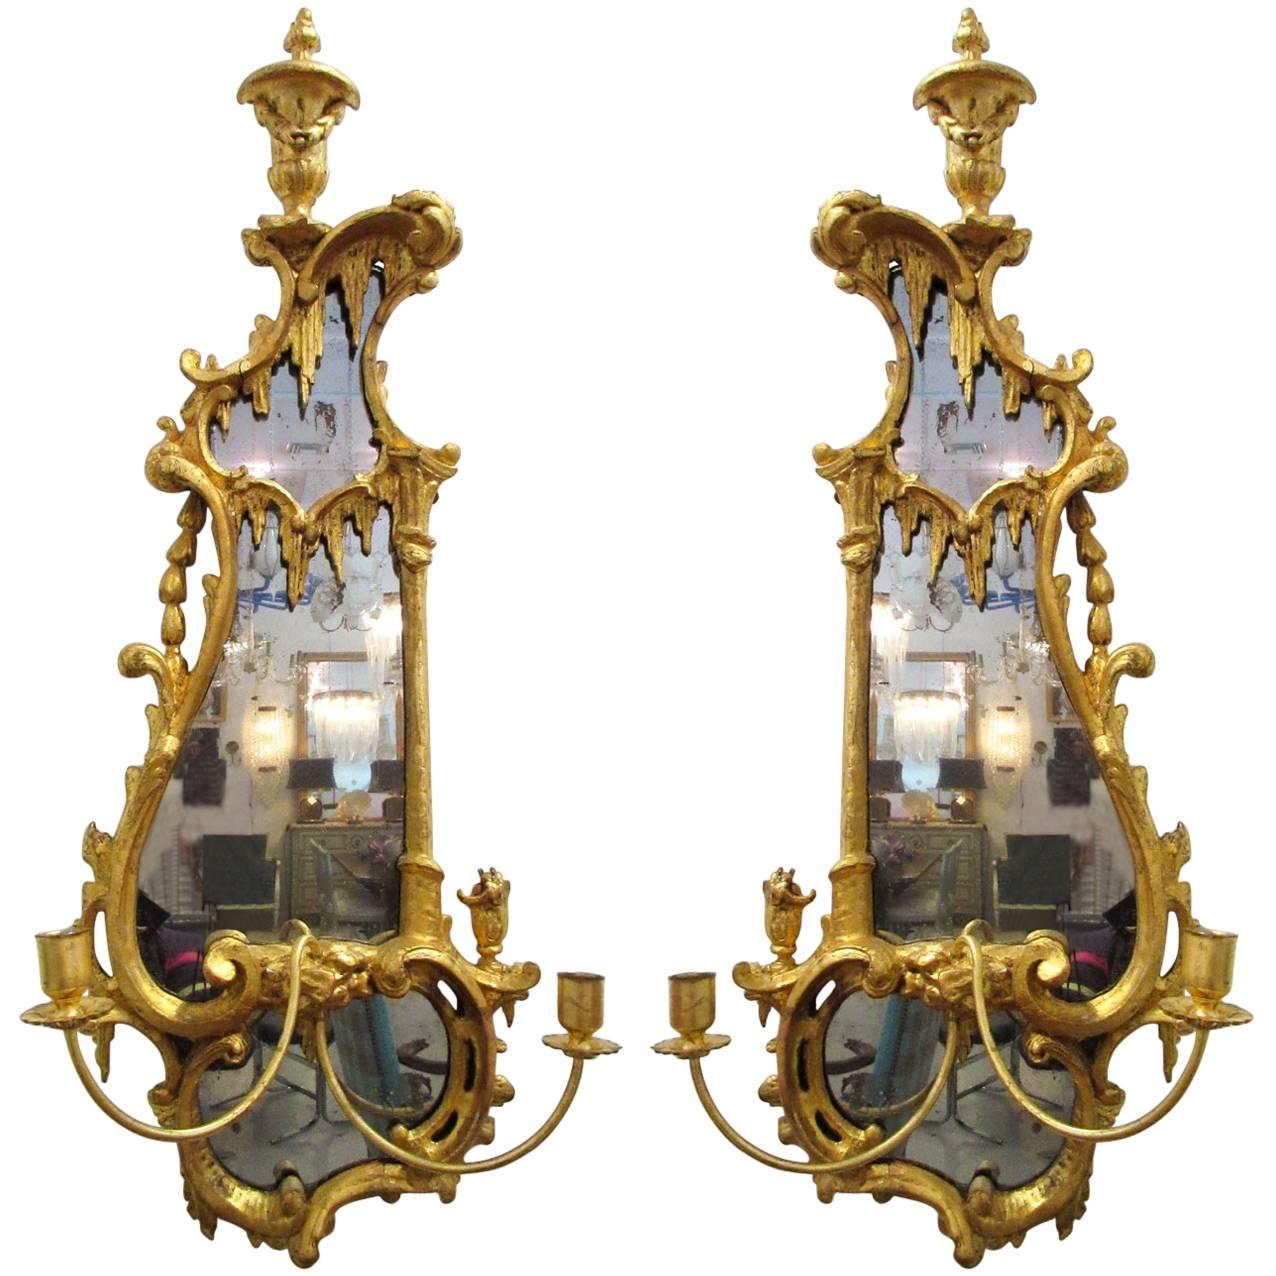 Pair of 18th Century English Giltwood Mirrors with Candleholders